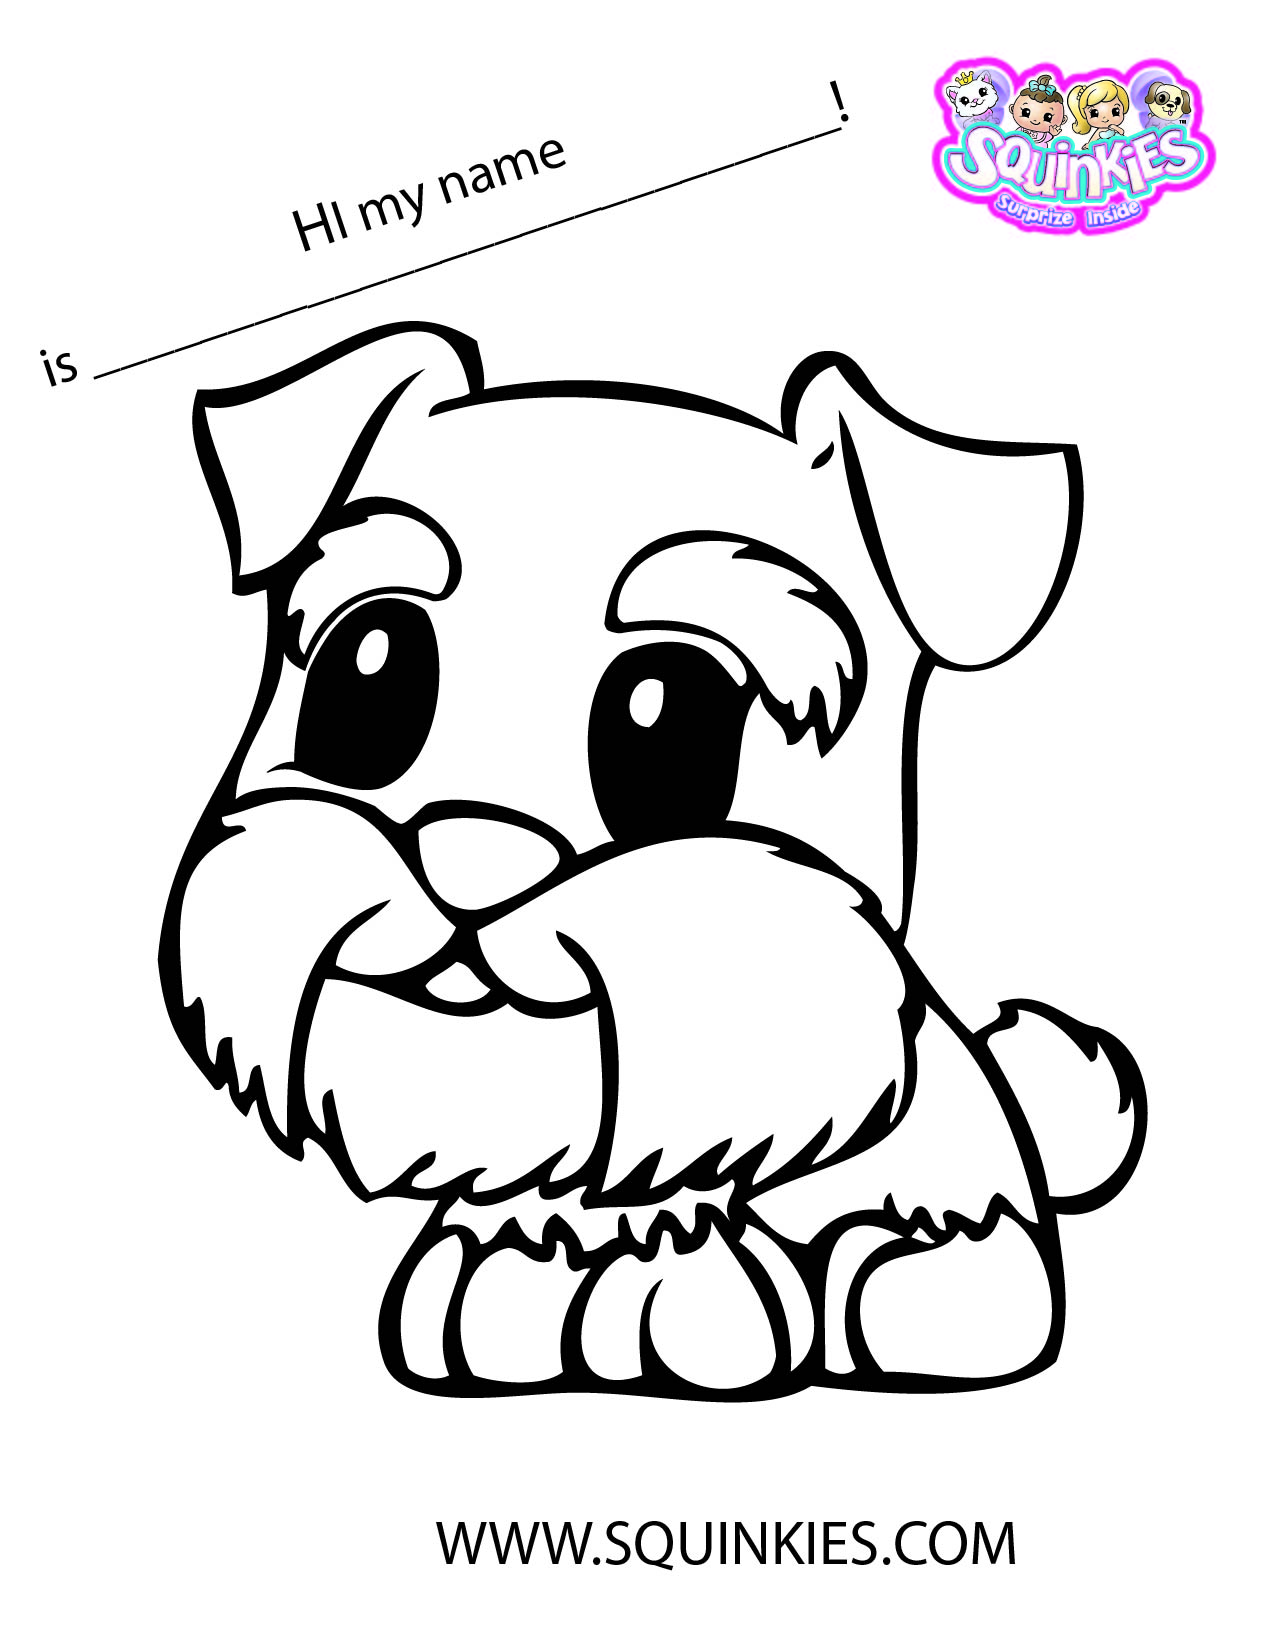 Squinkies Coloring Pages - GetColoringPages.com